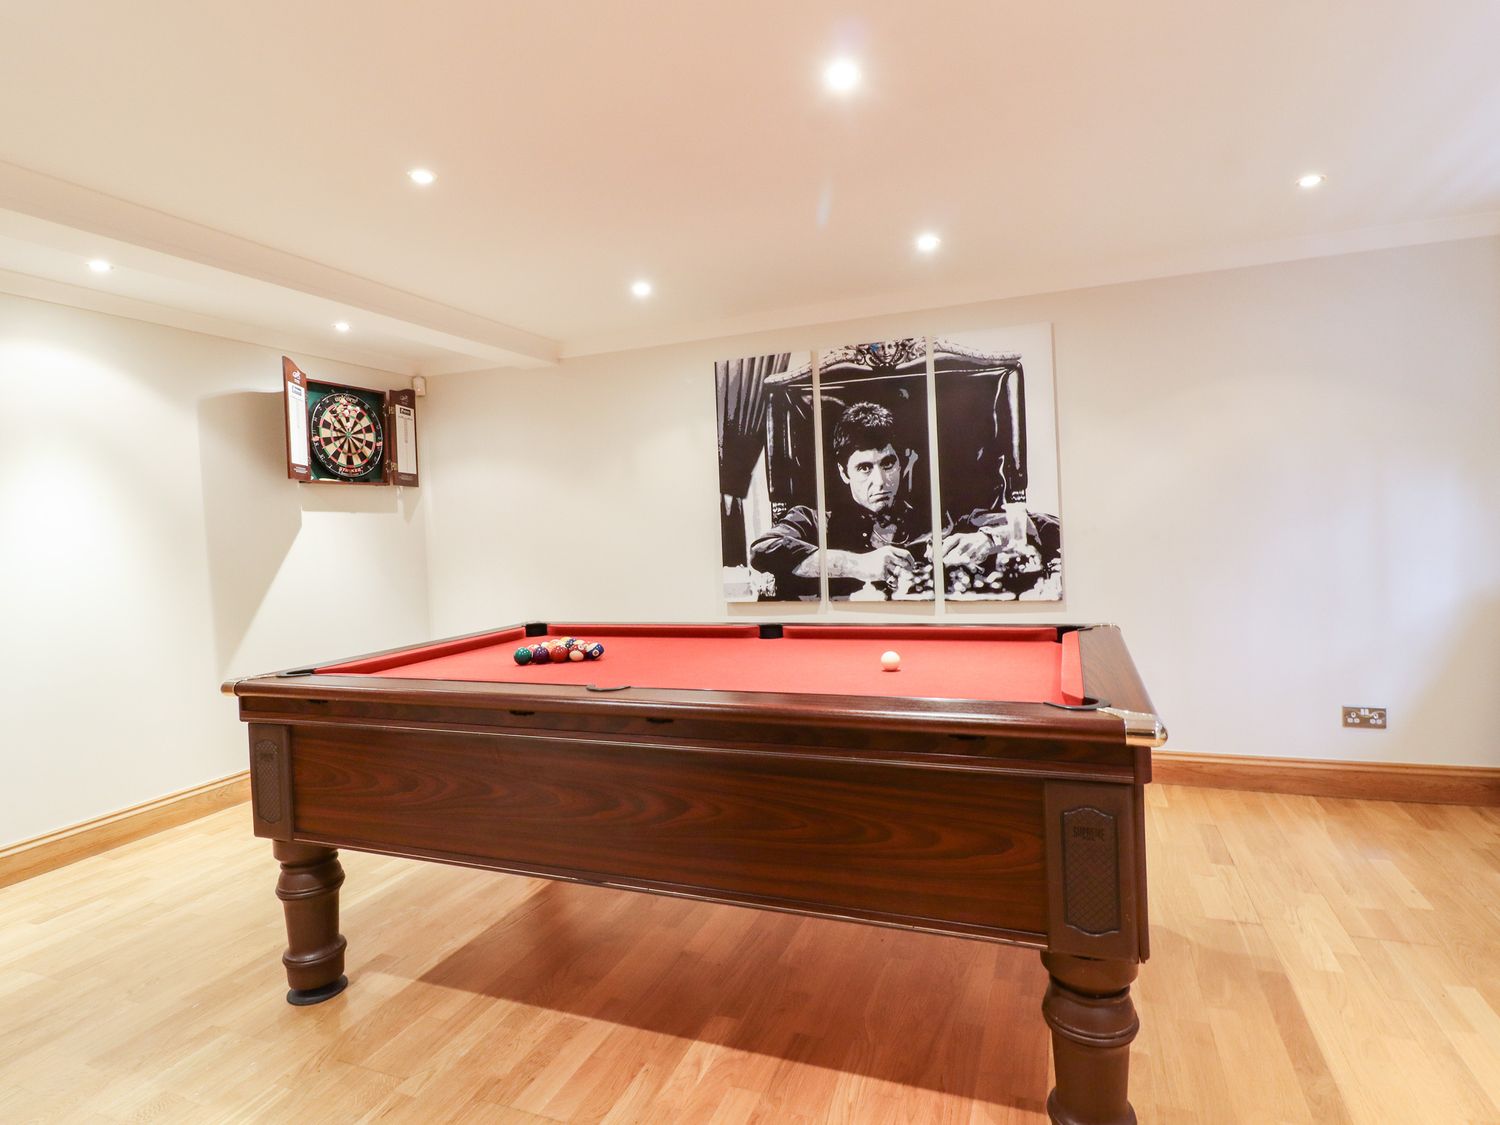 36 Glen Road in Eldwick, West Yorkshire. Five-bedroom stylish home with games room and hot tub. Pets